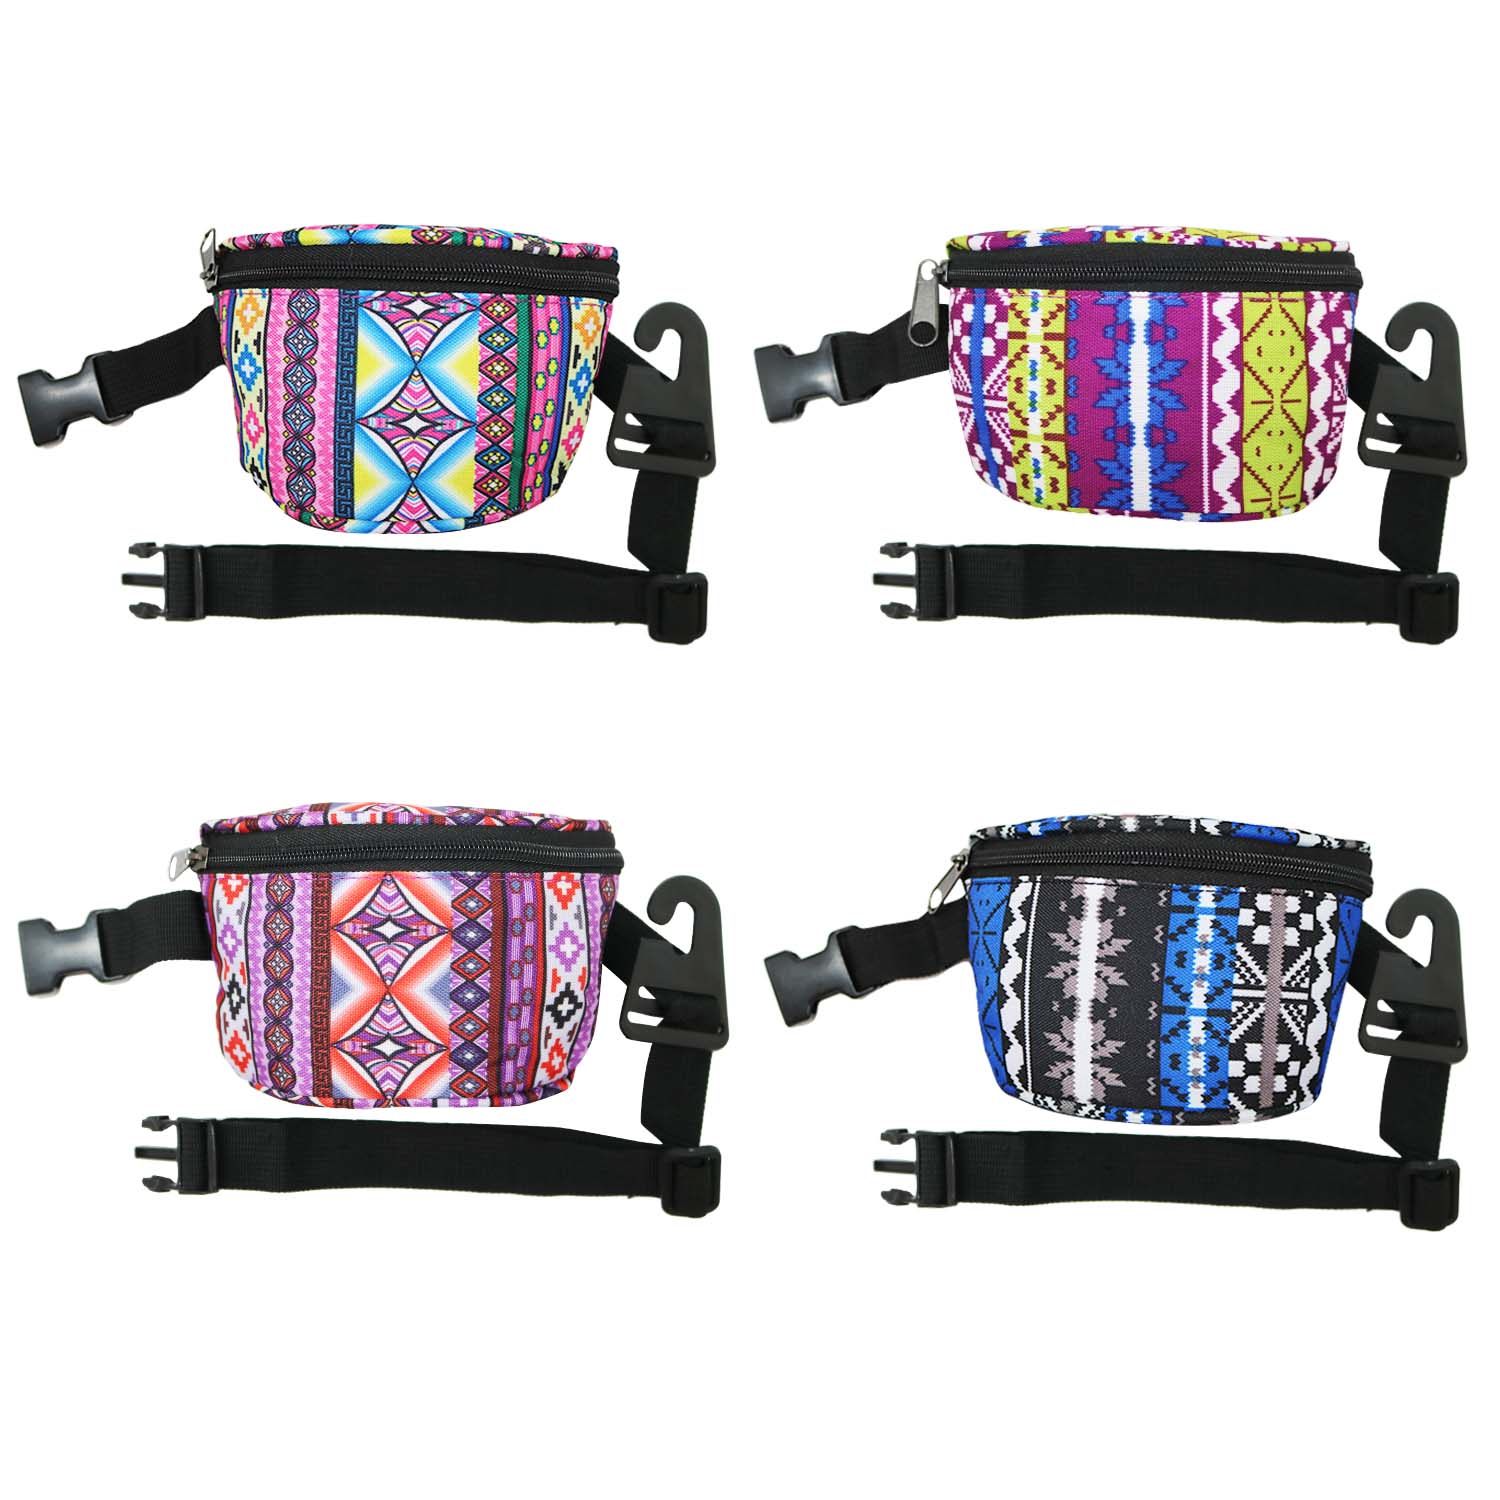 Kids Camouflage Wholesale Fanny Pack in 4 Assorted Designs - Bulk Case of 24